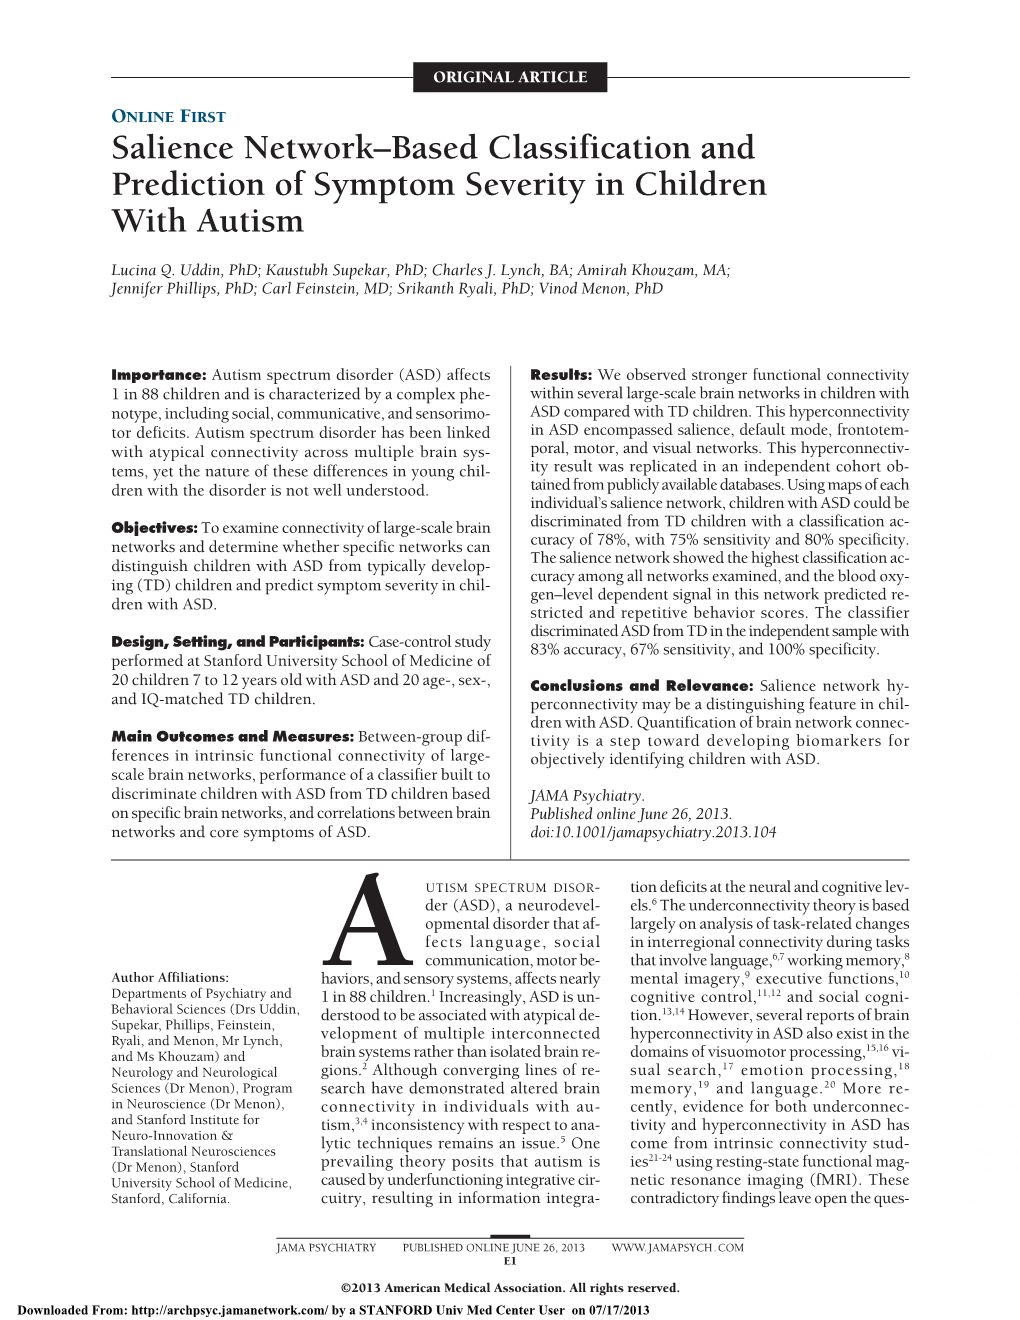 Salience Network–Based Classification and Prediction of Symptom Severity in Children with Autism